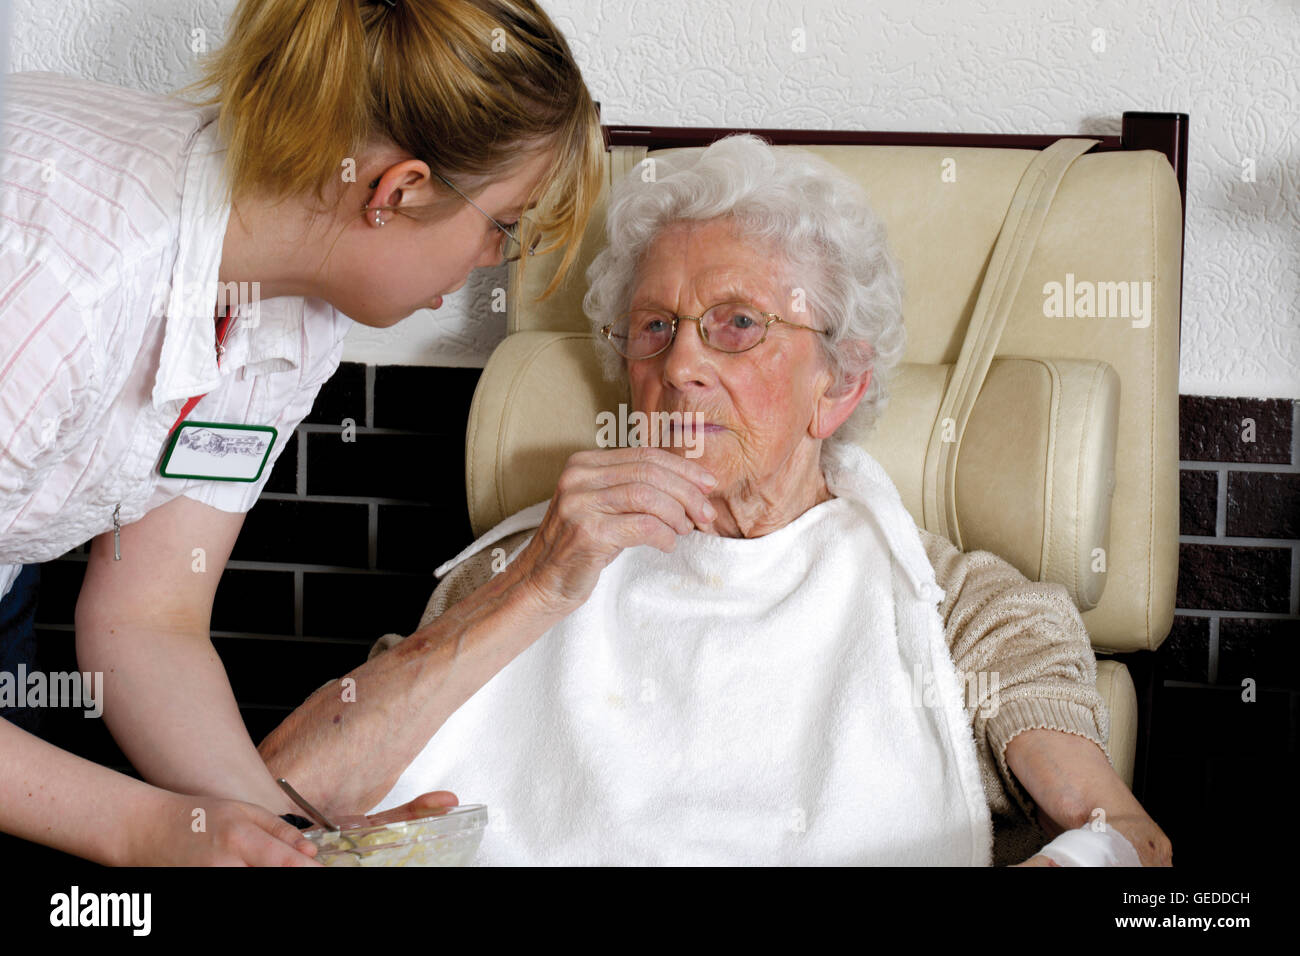 Caregiver offering affectionate care to an elderly woman at a nursing home Stock Photo